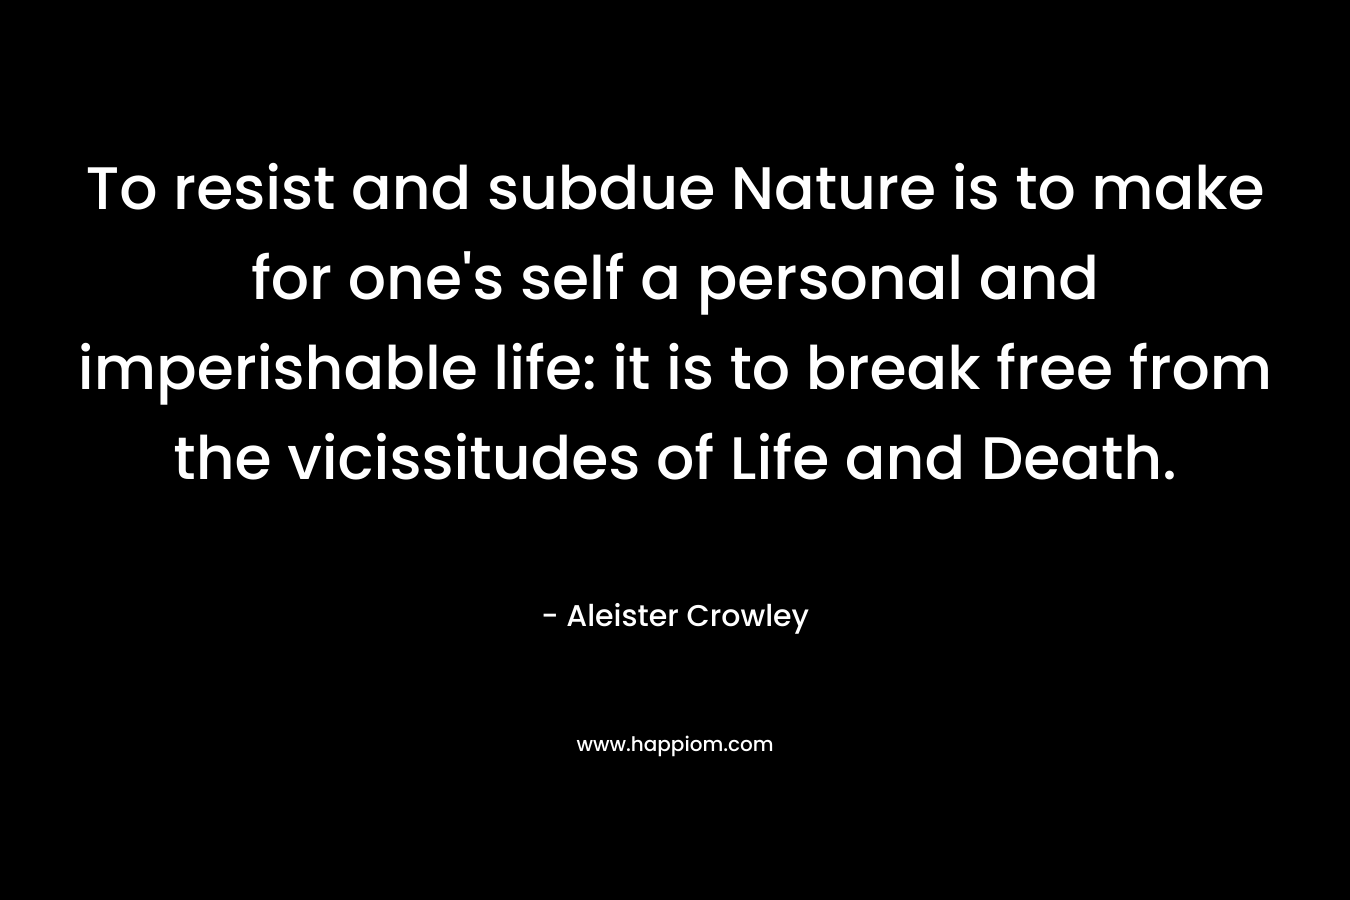 To resist and subdue Nature is to make for one’s self a personal and imperishable life: it is to break free from the vicissitudes of Life and Death. – Aleister Crowley